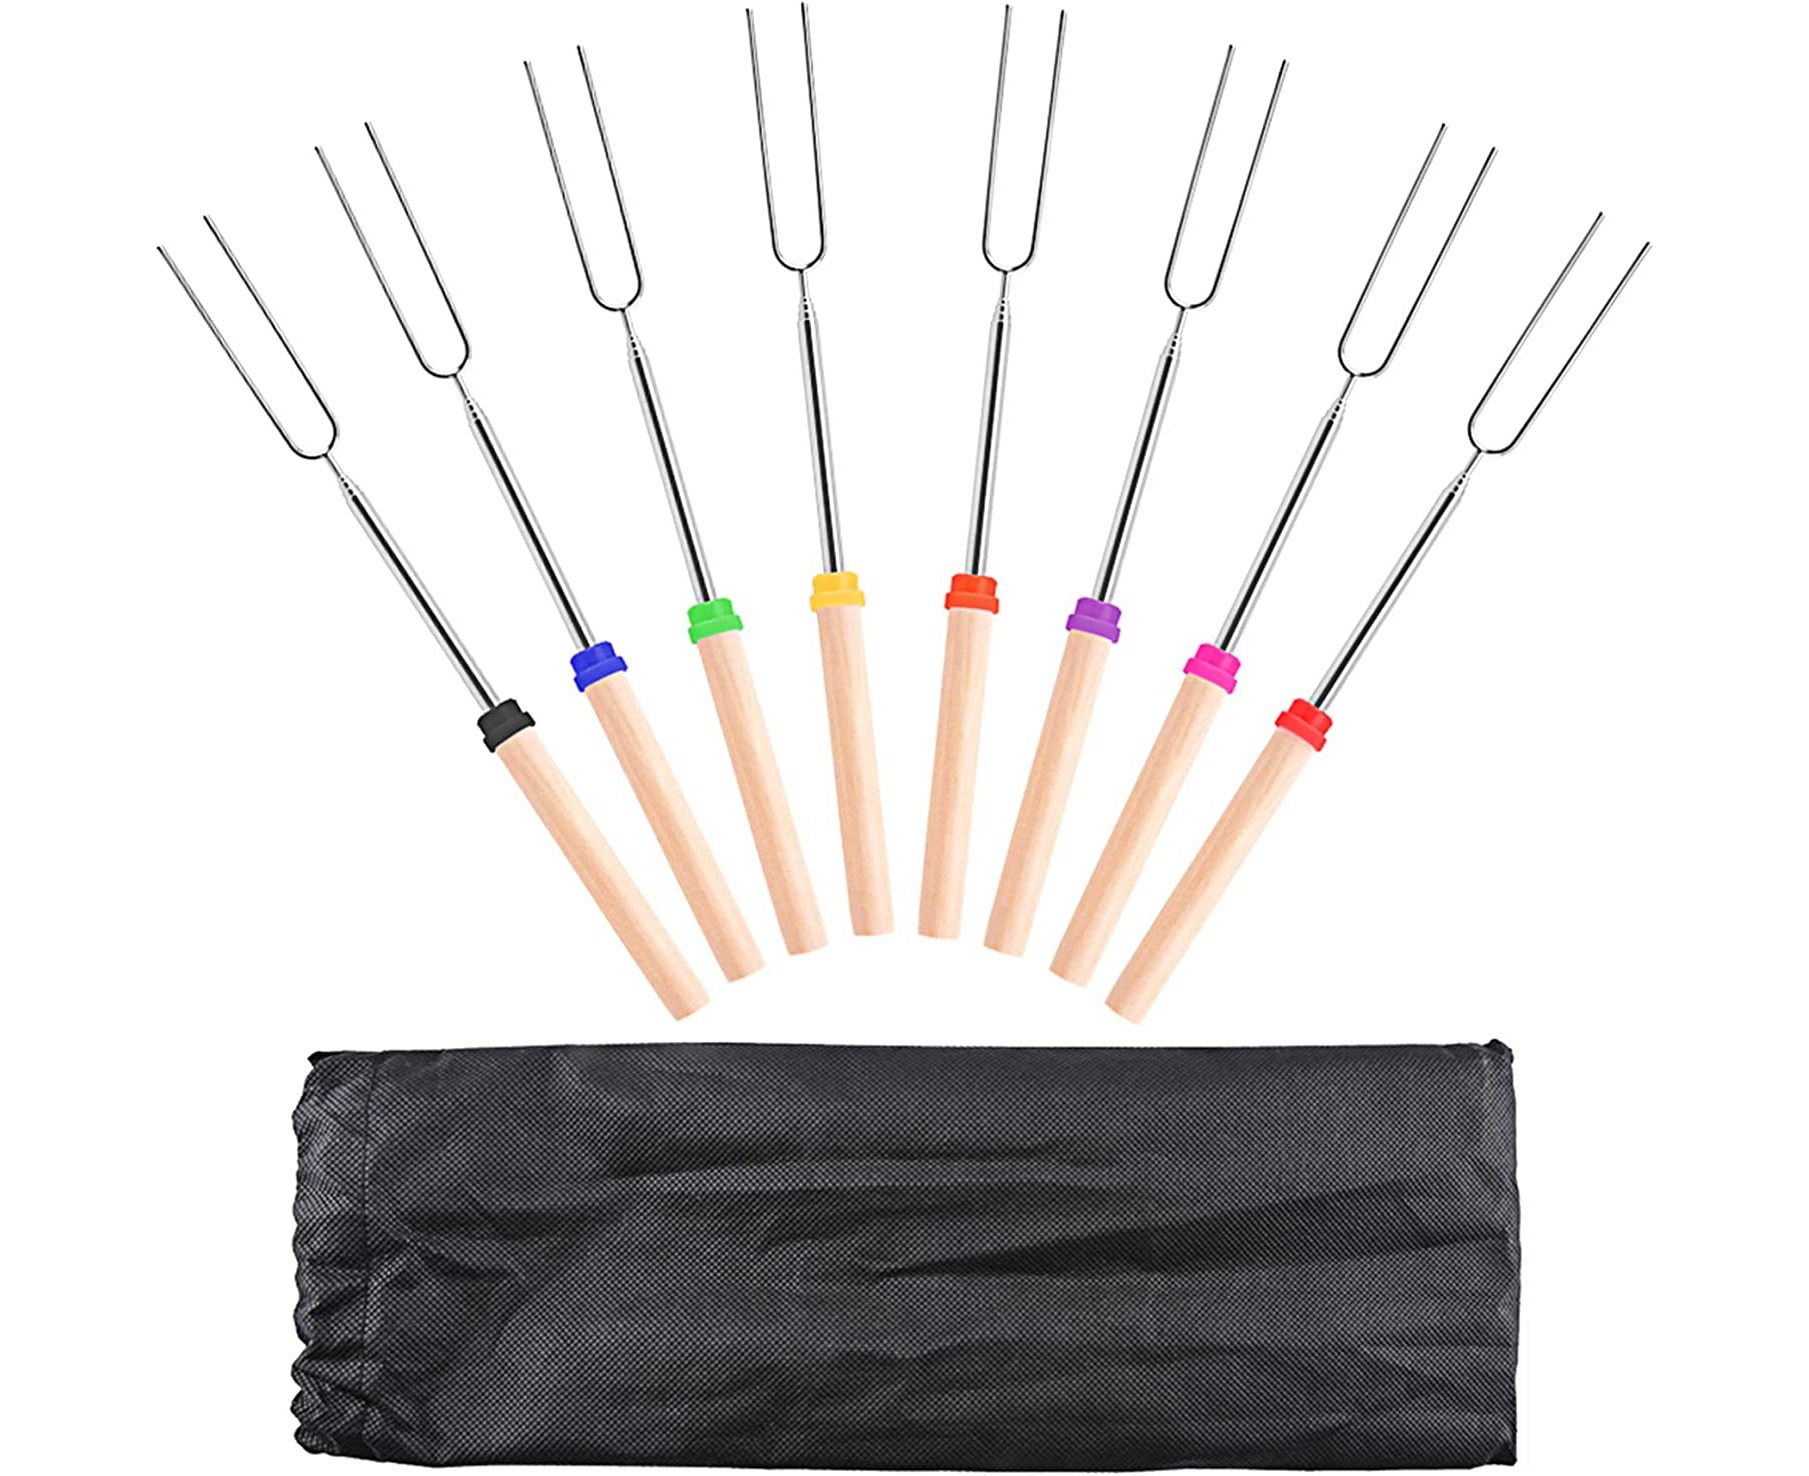 and Sausage BBQ 32 Inch Luzon Marshmallow Roasting Sticks with Wooden Handle Extendable Forks Set of 8 Pcs Telescoping Smores Skewers for Campfire,Firepit 